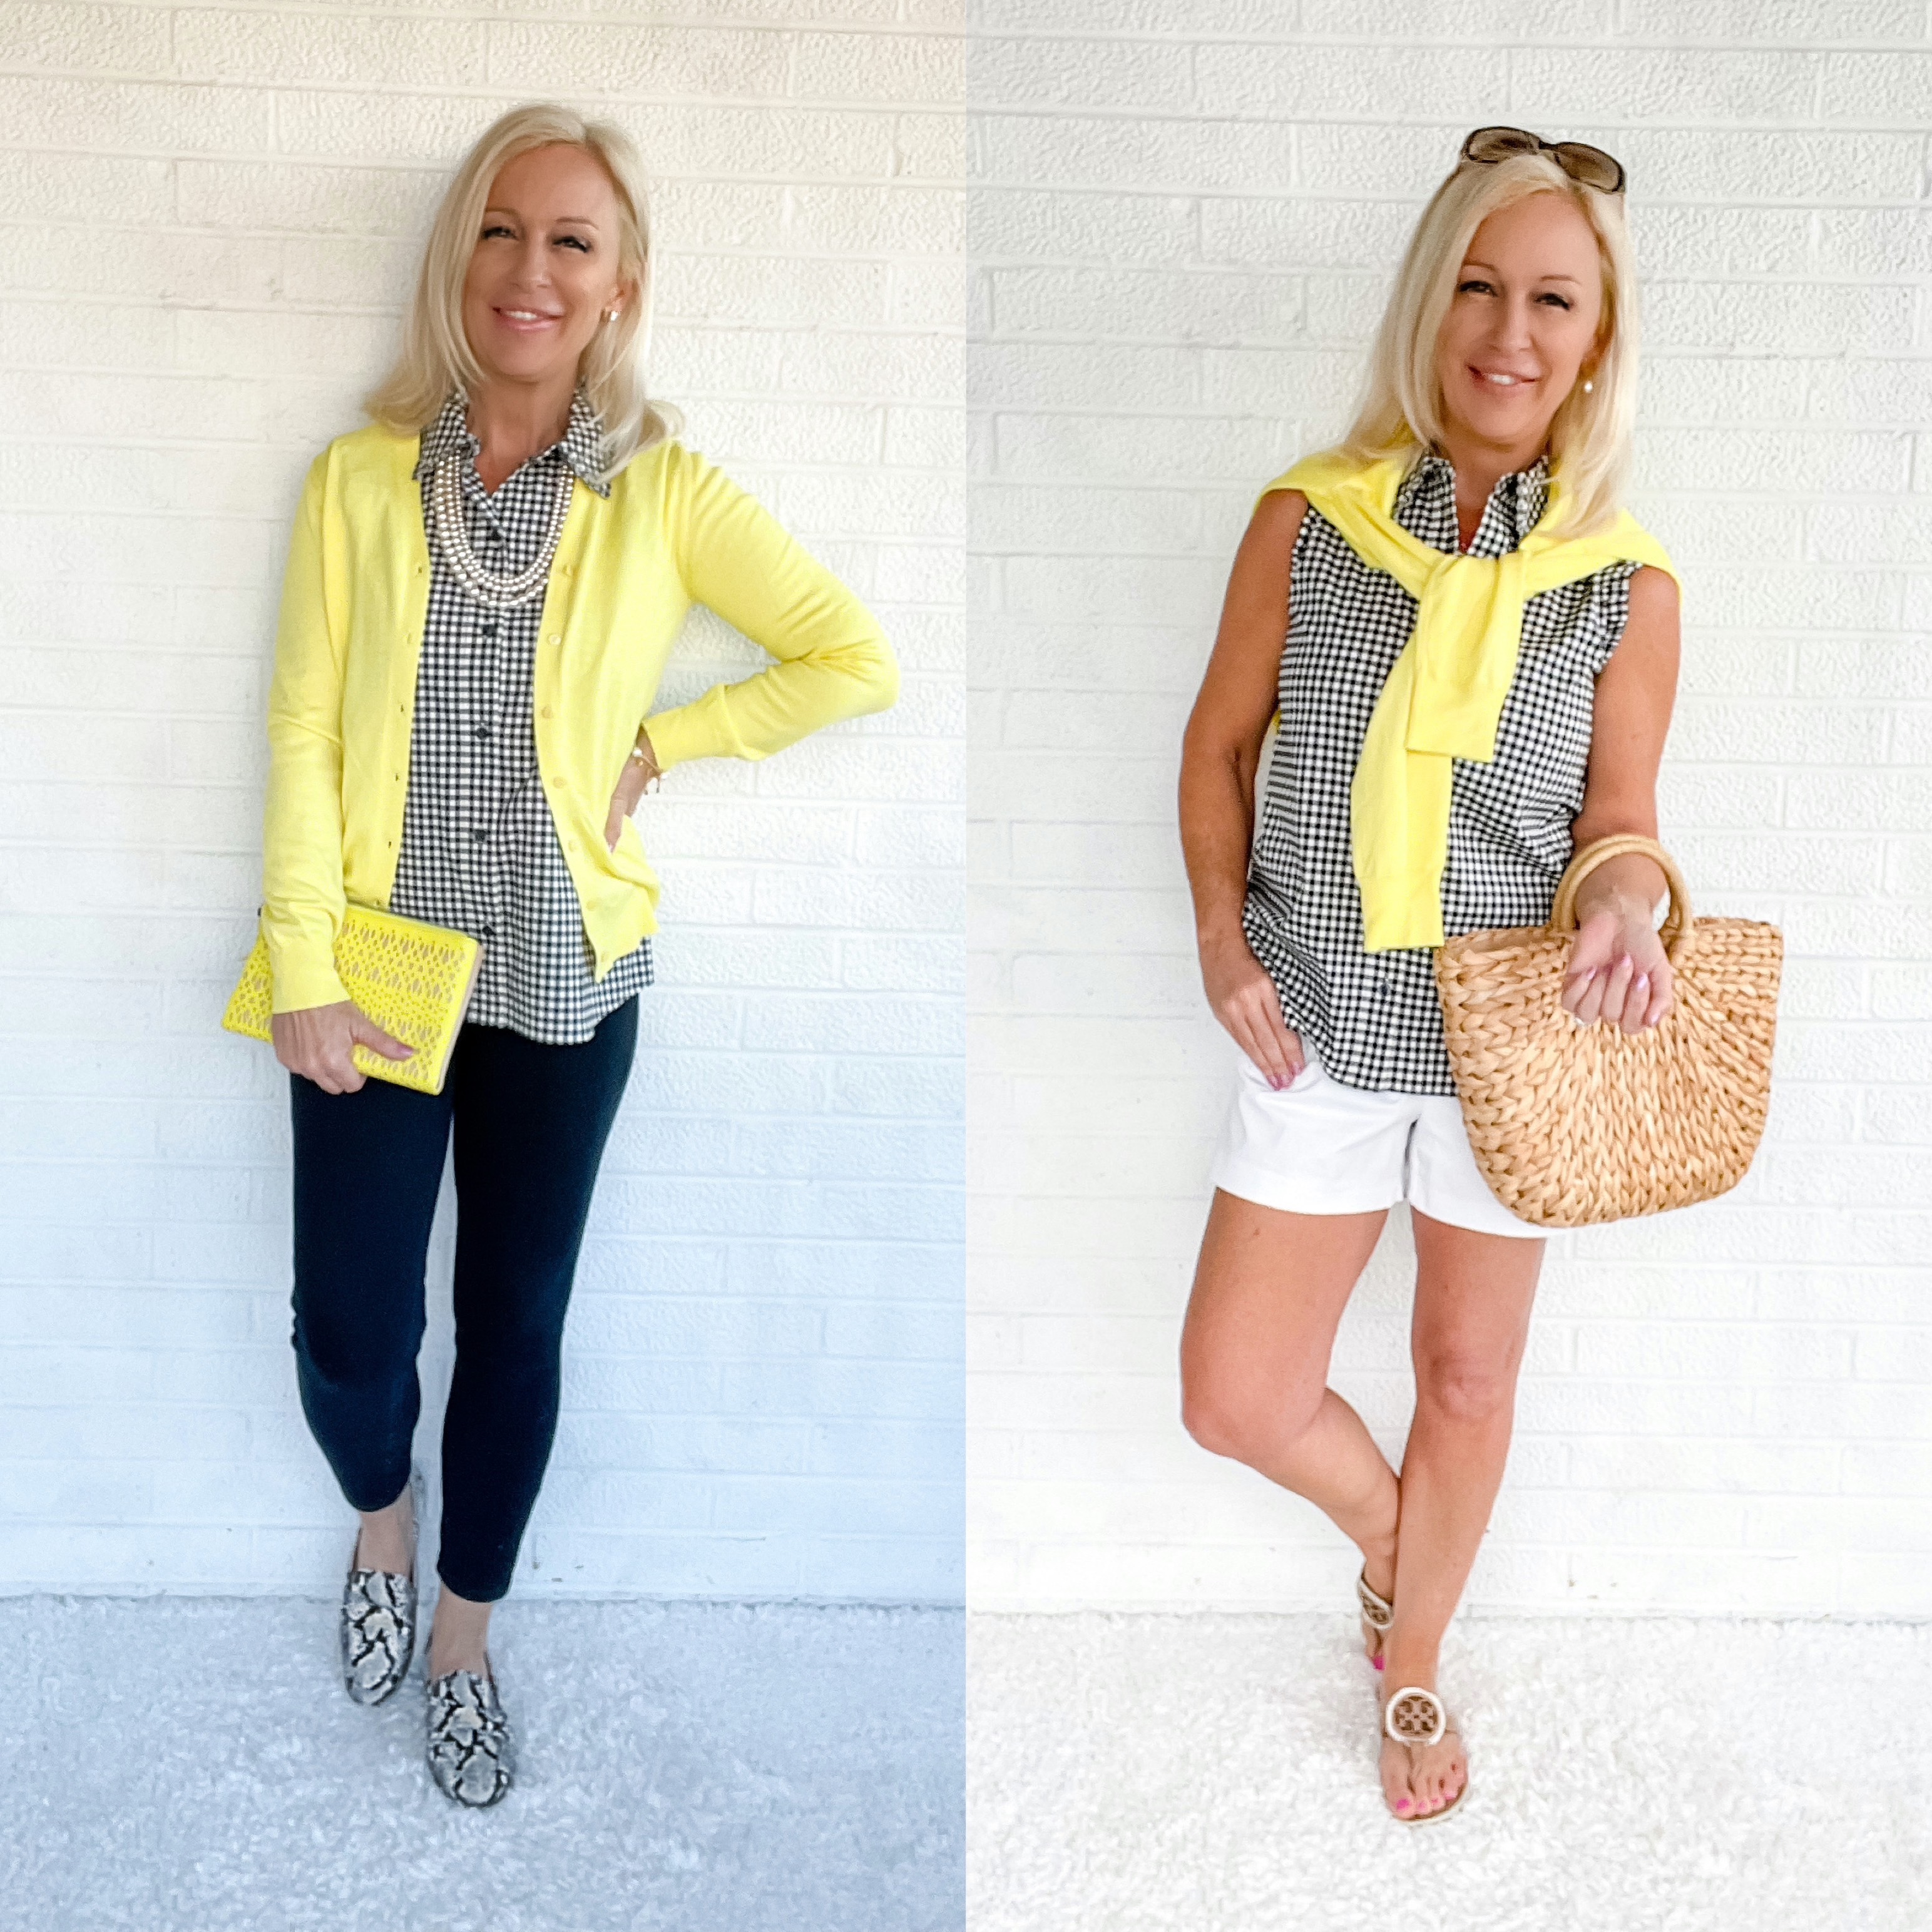 Clothing for Winter AND Travel: Gingham and Yellow